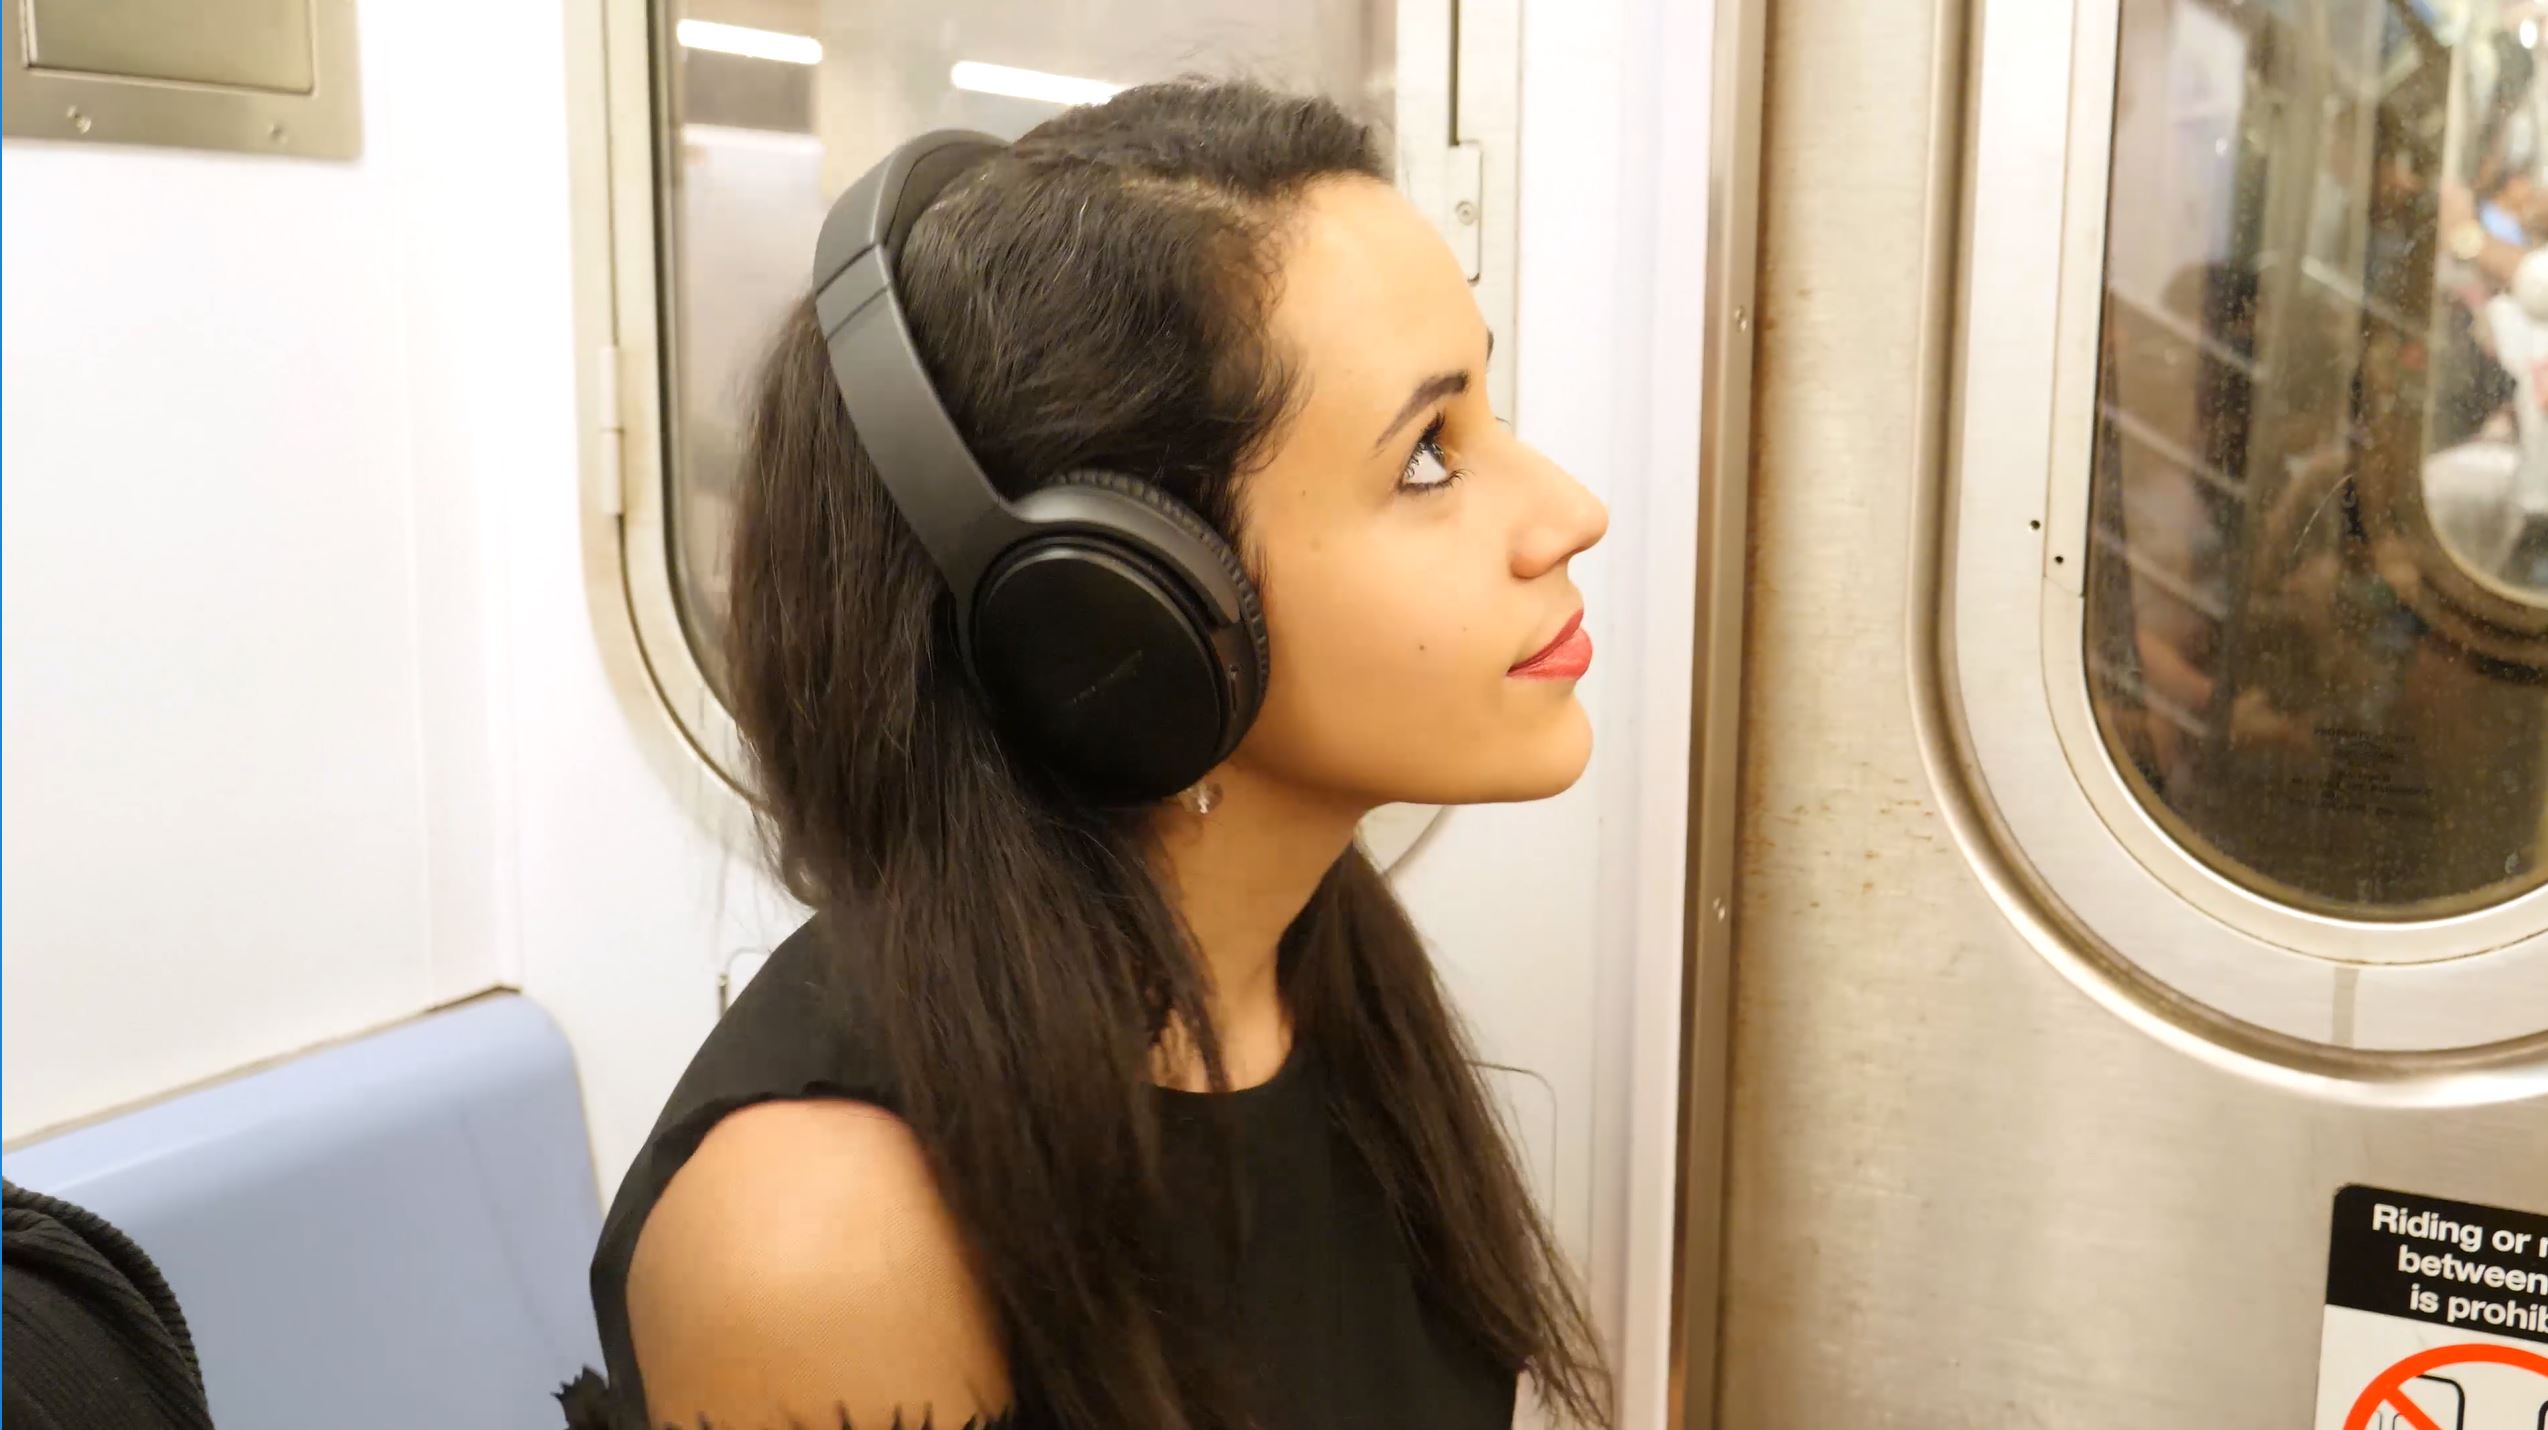 25 Things You Need to Know About the NYC Subway headphones and music